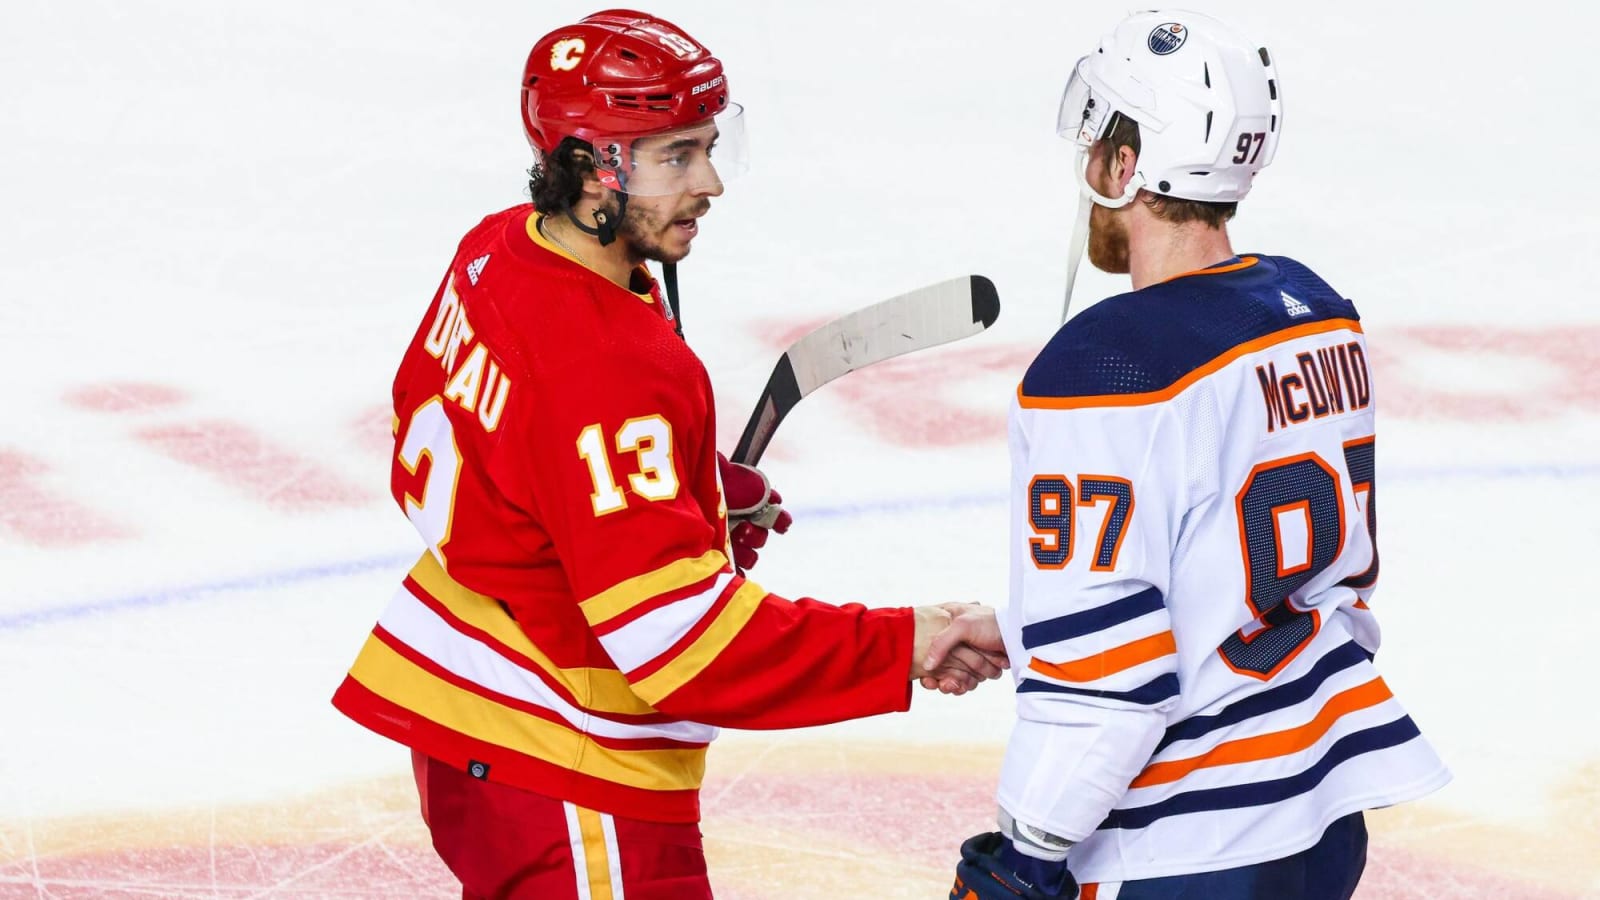 Where does Johnny Gaudreau fit in pantheon of Flames franchise greats?